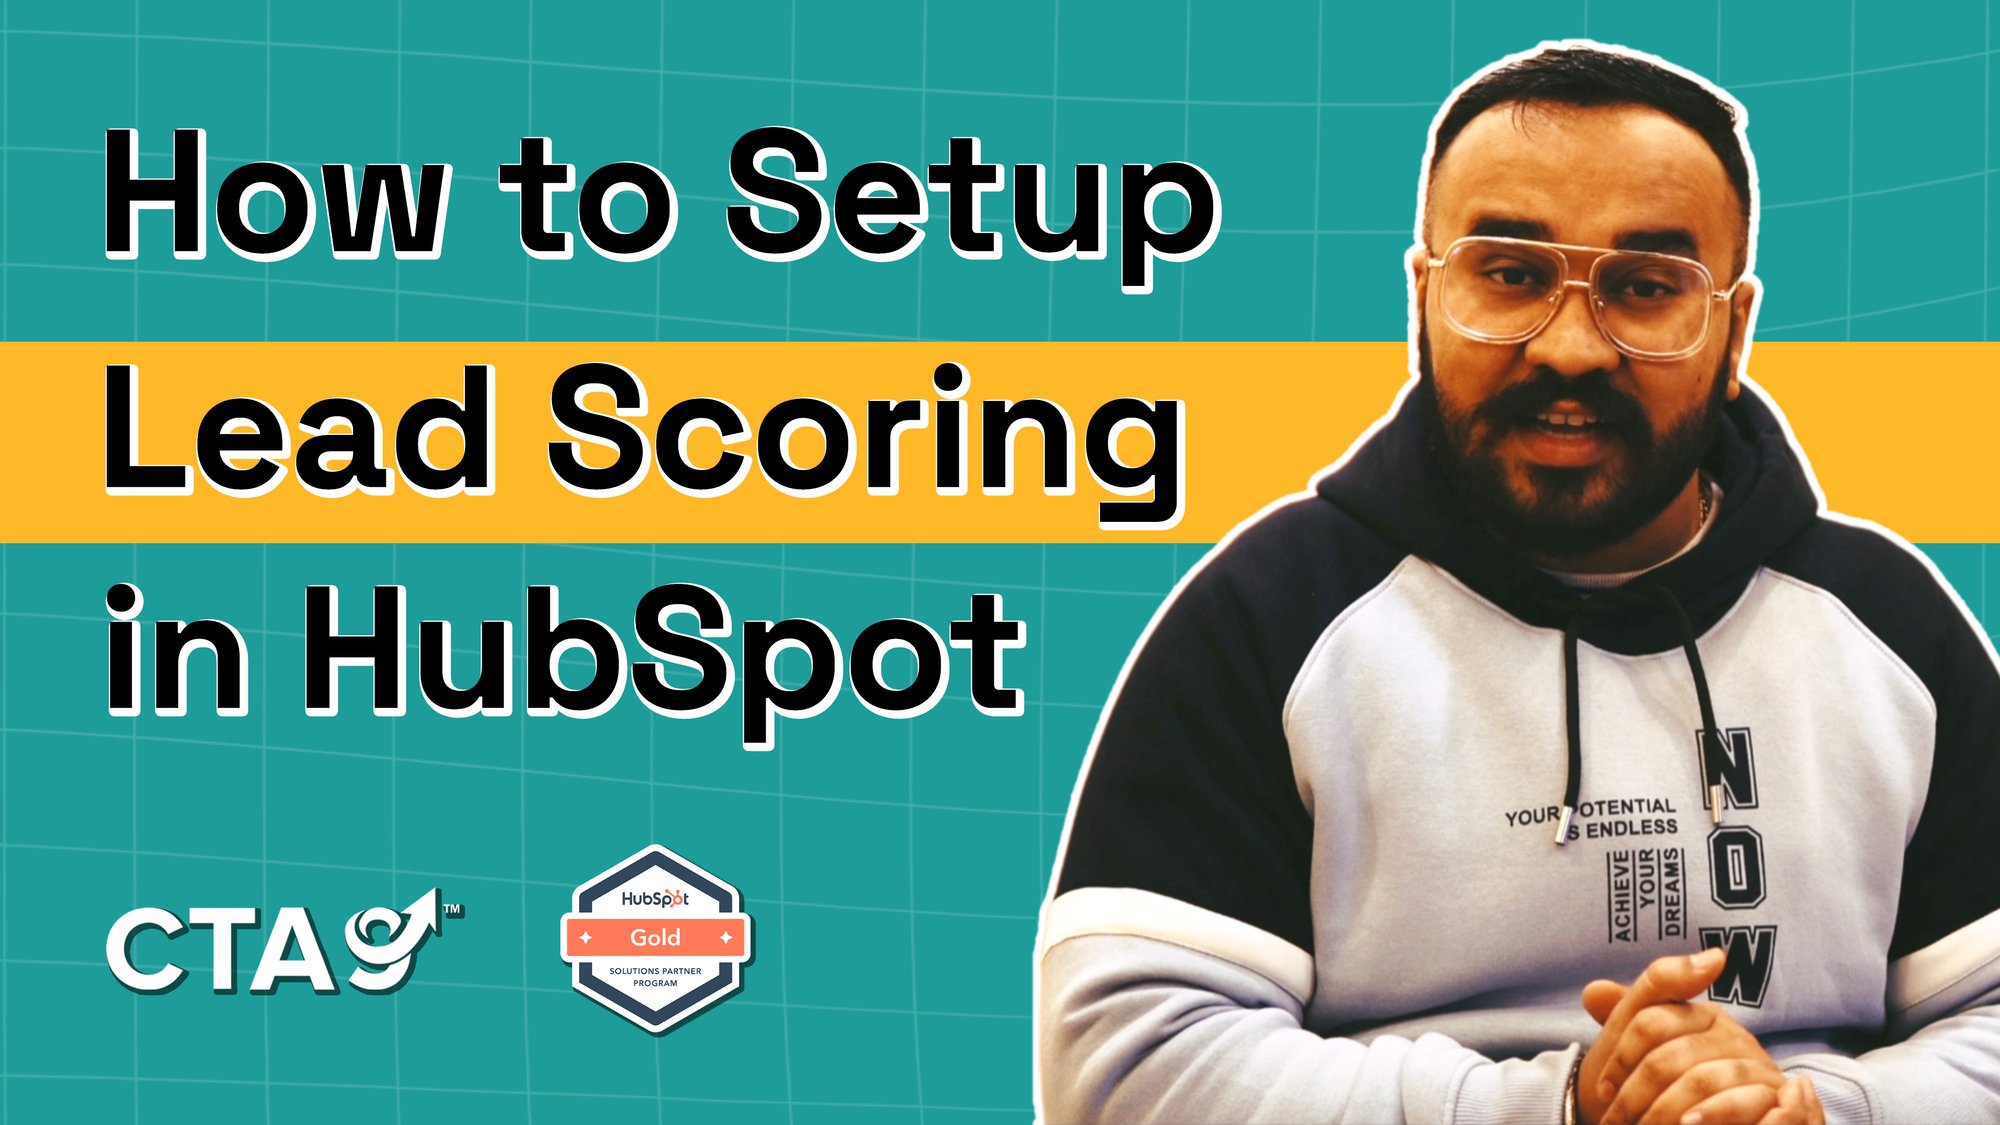 How to Setup Lead Scoring in HubSpot